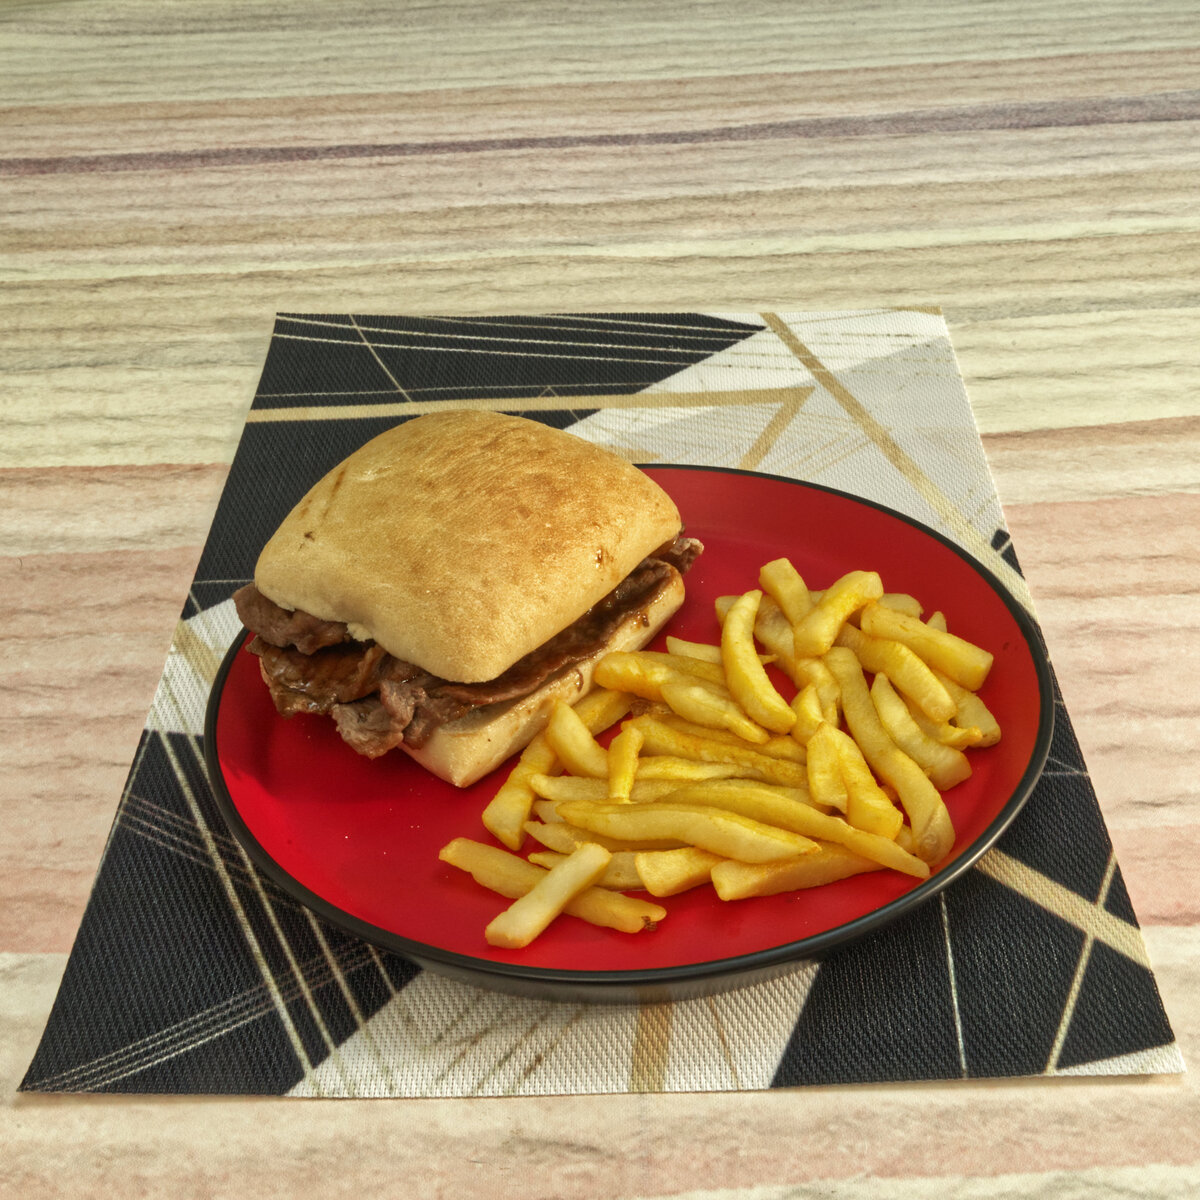 Barbecue Roast Beef Sandwich with French Fries